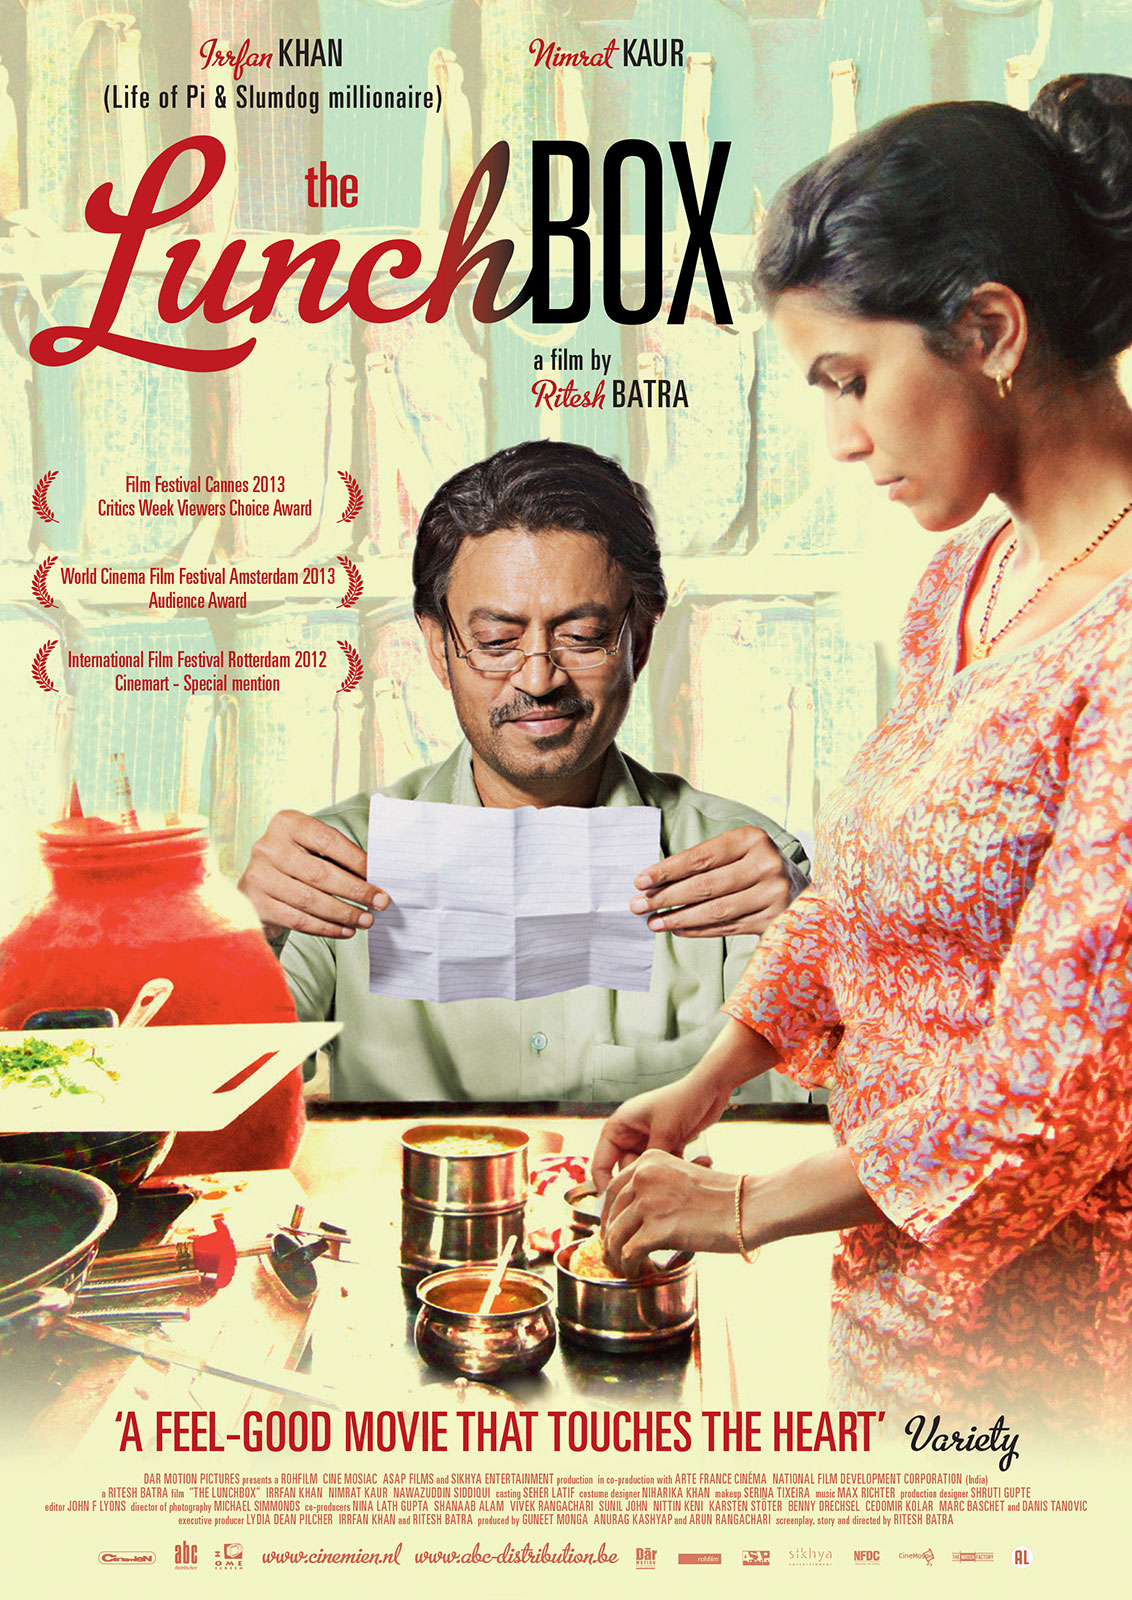 Â  Â Â In how many foreign countries 'The Lunch Box' was released?Â 